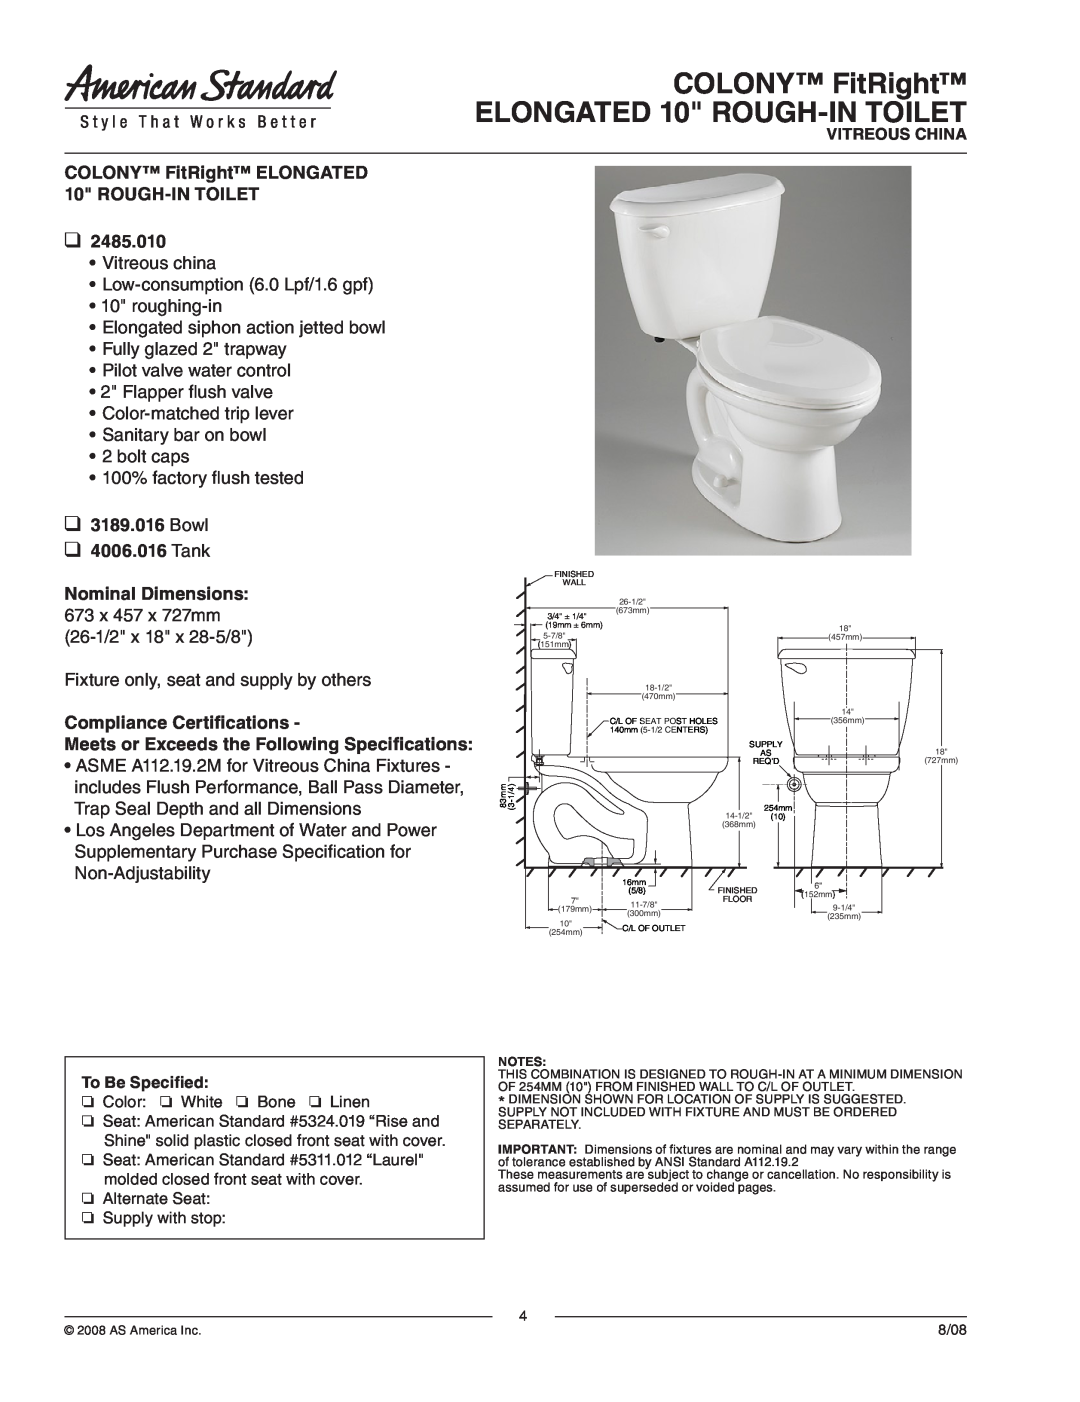 American Standard 3189.016 dimensions COLONY FitRight ELONGATED 10 ROUGH-INTOILET, 2485.010, Bowl 4006.016 Tank 